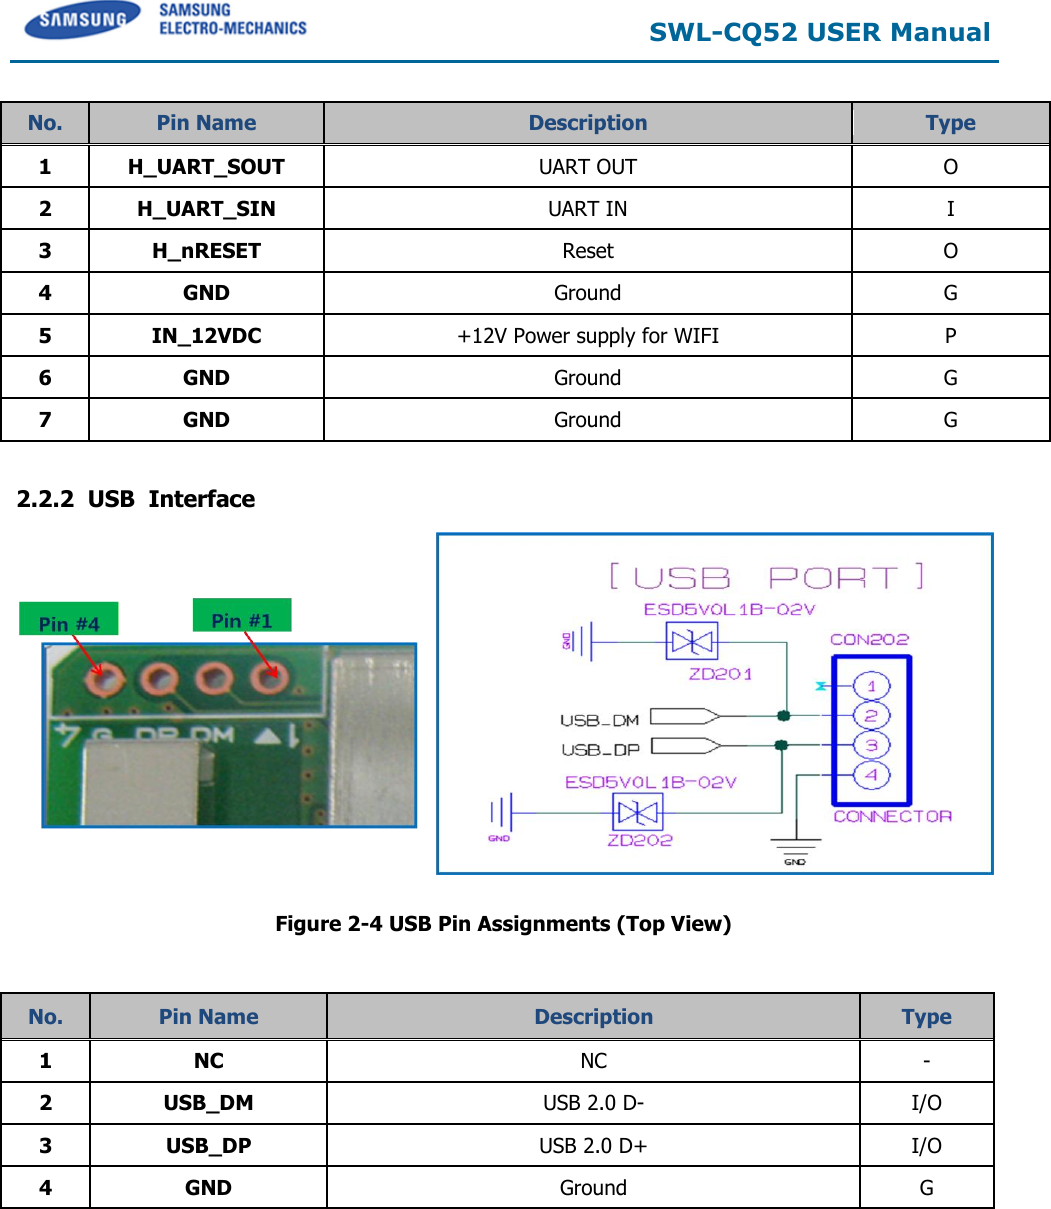  SWL-CQ52 USER Manual  No.  Pin Name  Description  Type  1 H_UART_SOUT UART OUT O 2 H_UART_SIN UART IN I 3 H_nRESET Reset O 4 GND Ground G 5 IN_12VDC +12V Power supply for WIFI P 6 GND Ground G 7 GND Ground G  2.2.2  USB  Interface   Figure 2-4 USB Pin Assignments (Top View)  No.  Pin Name  Description  Type  1 NC NC - 2 USB_DM USB 2.0 D- I/O 3 USB_DP USB 2.0 D+ I/O 4 GND Ground G     